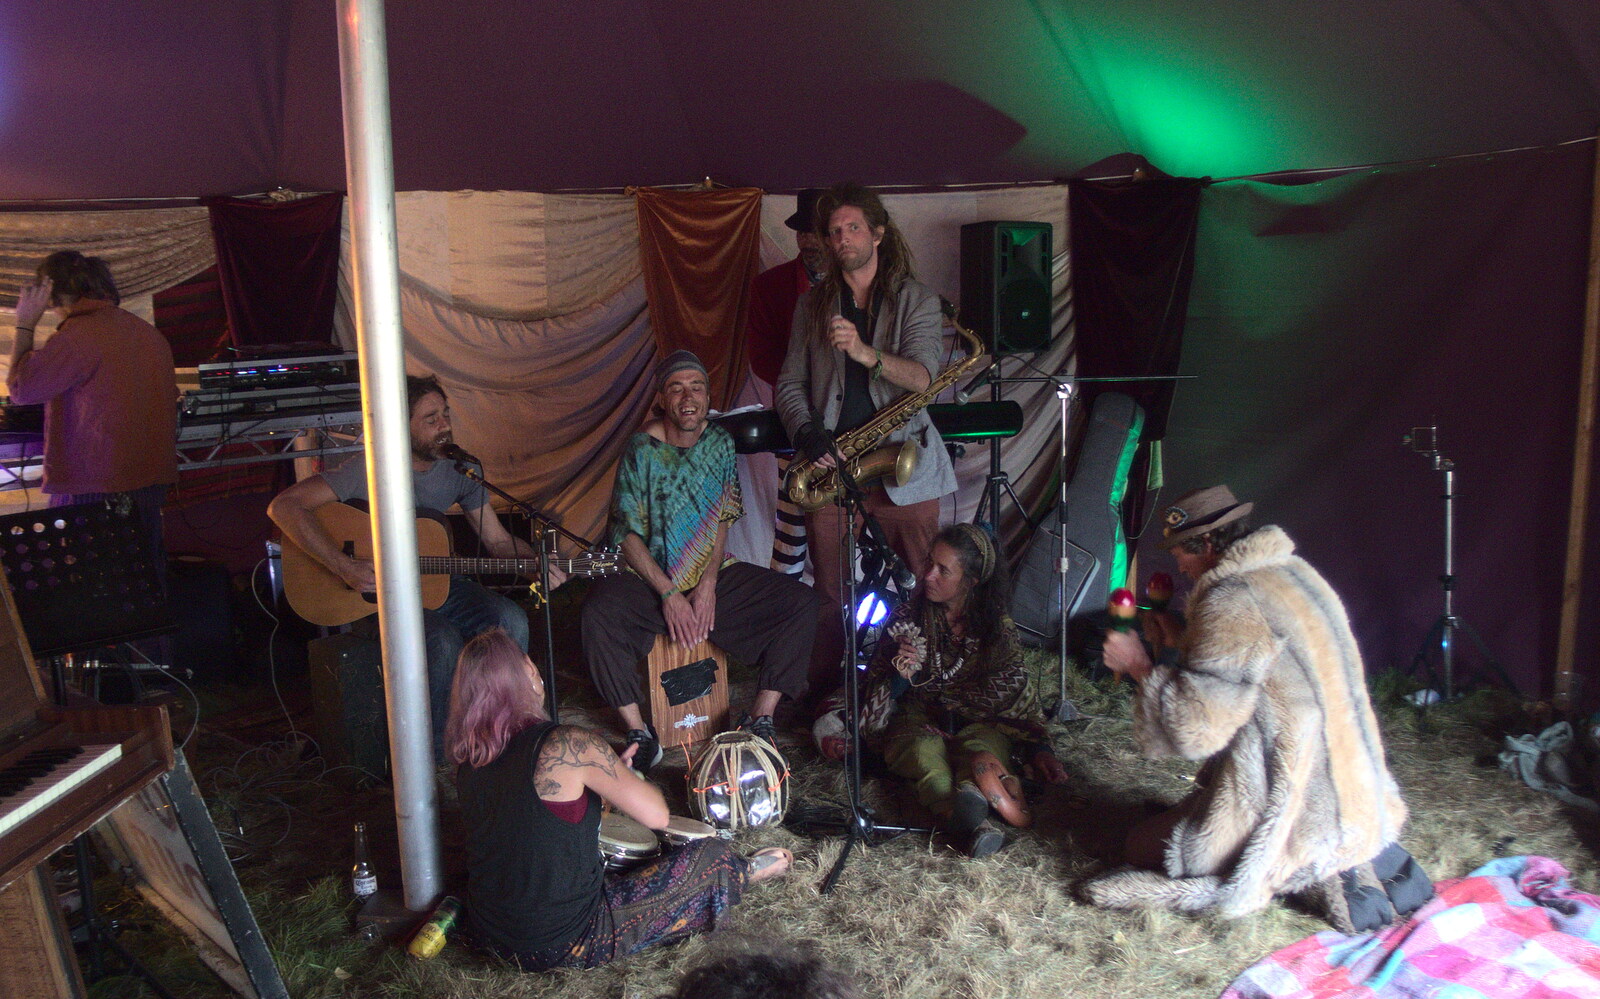 A break-out music session in the beer tent from Maui Waui Festival, Hill Farm, Gressenhall, Norfolk - 28th August 2021